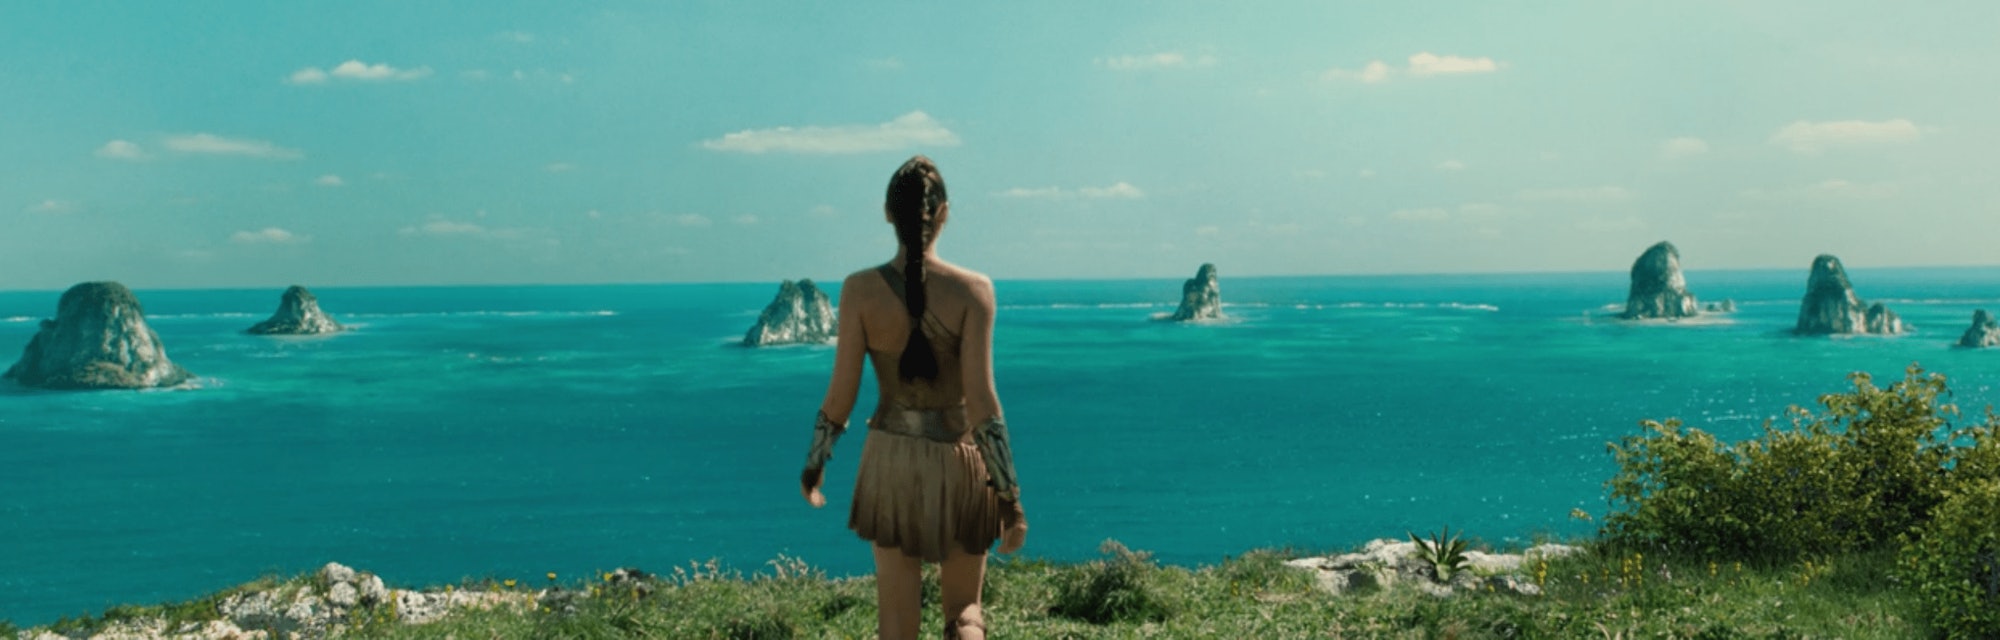 View of Diana looking out at the ocean from Wonder Woman